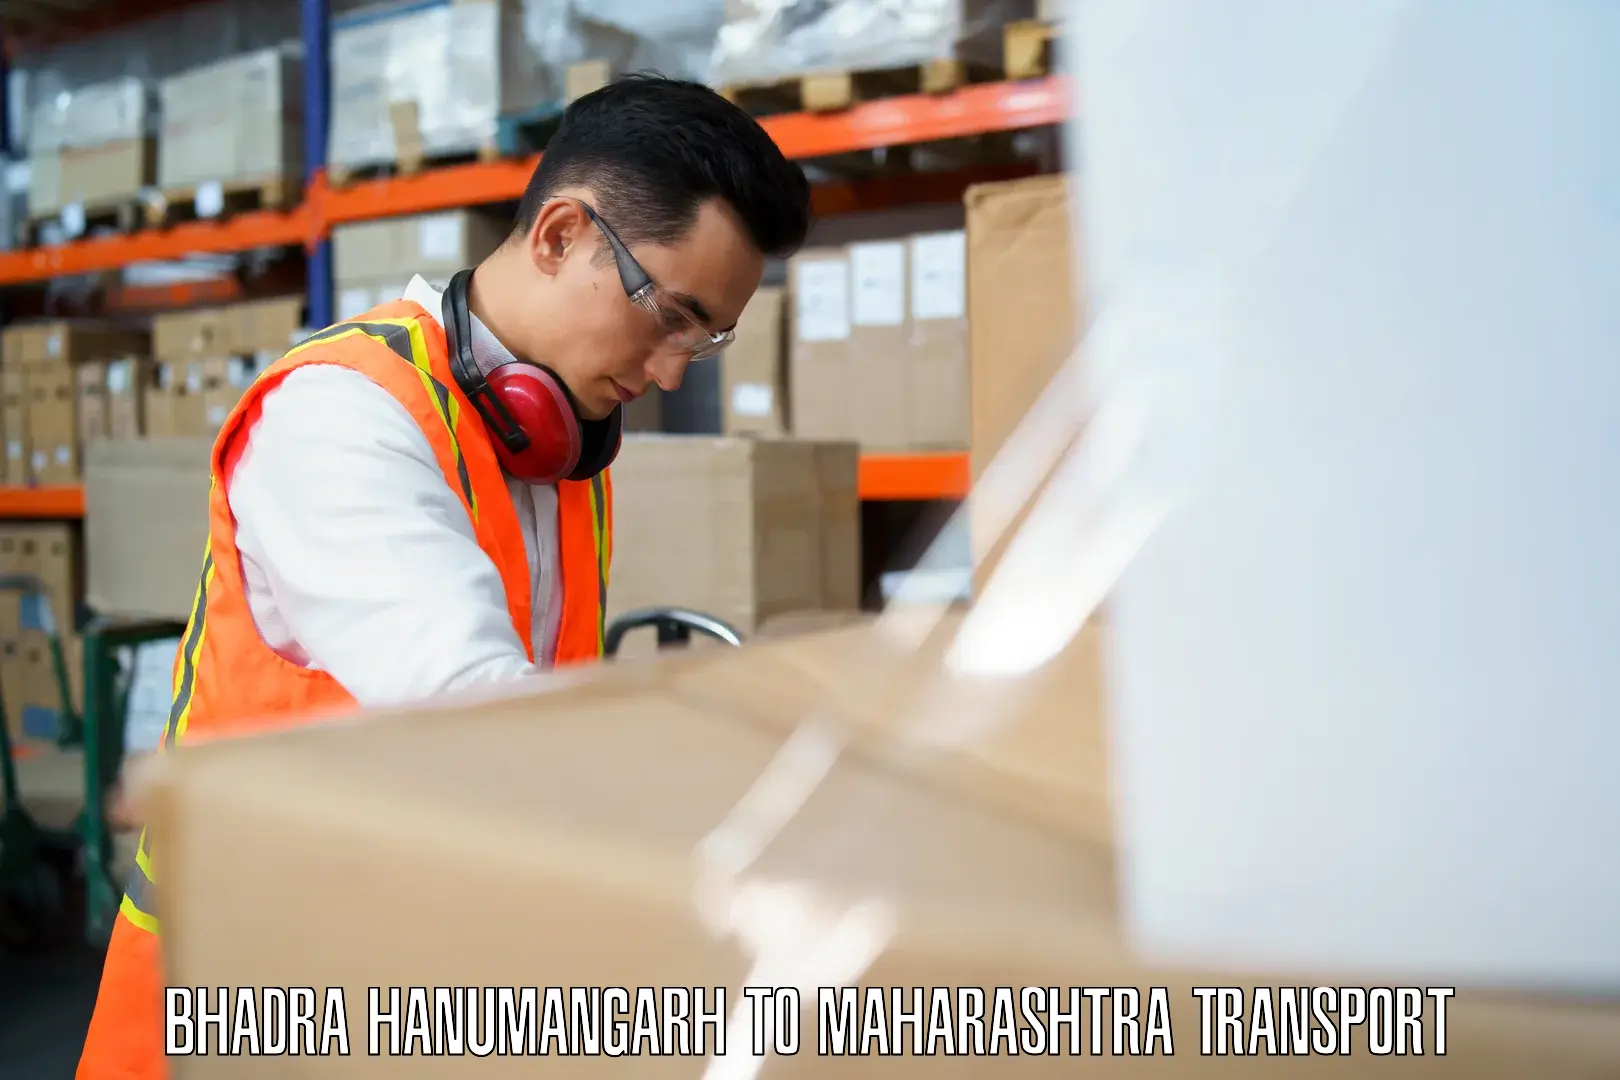 Package delivery services Bhadra Hanumangarh to Khandala Pune